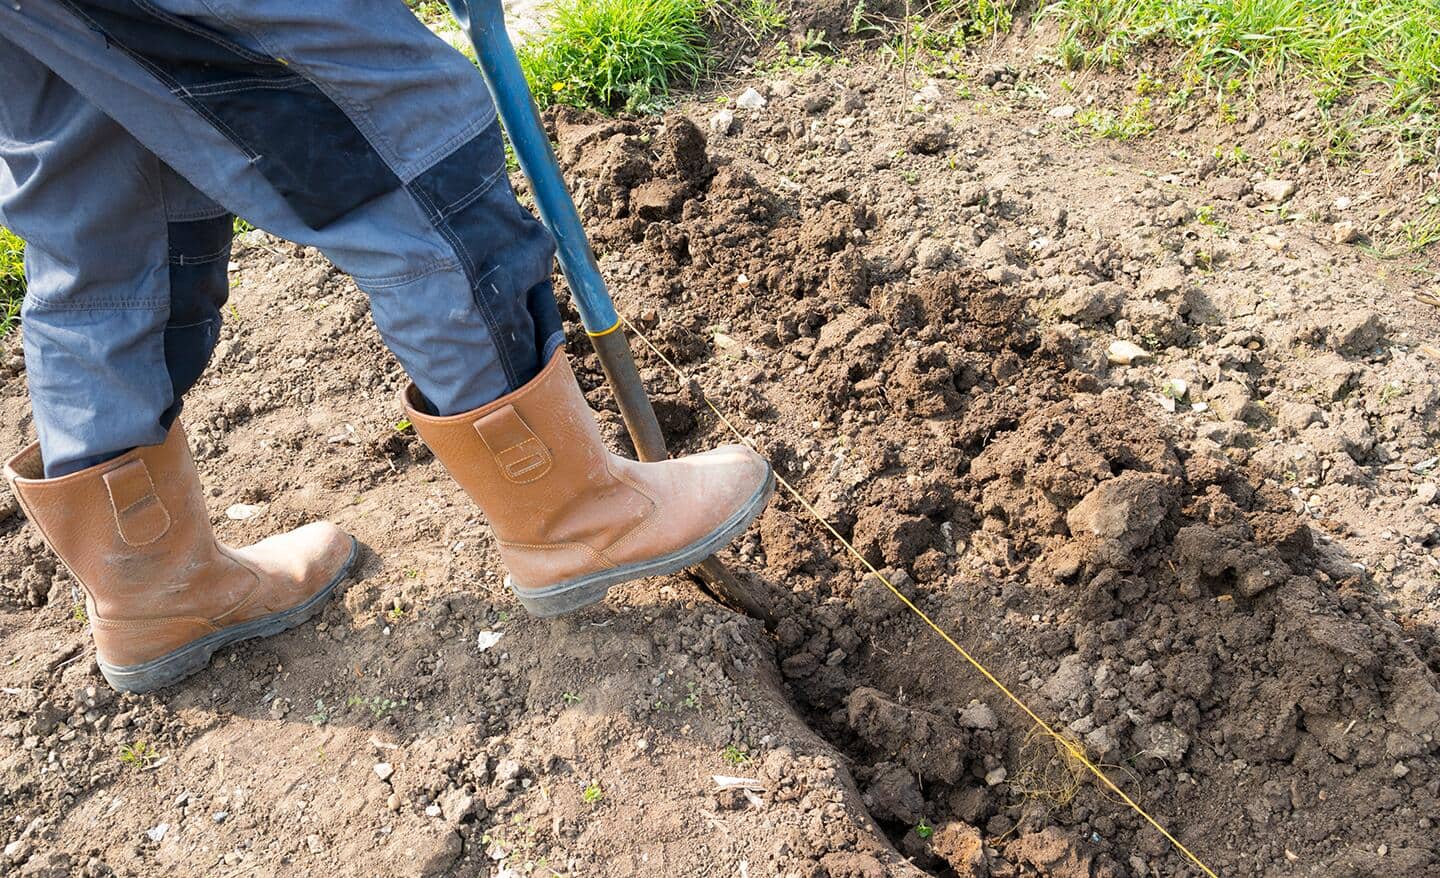 A shovel is used to dig a trench as a worker drives it into the ground with a booted foot.